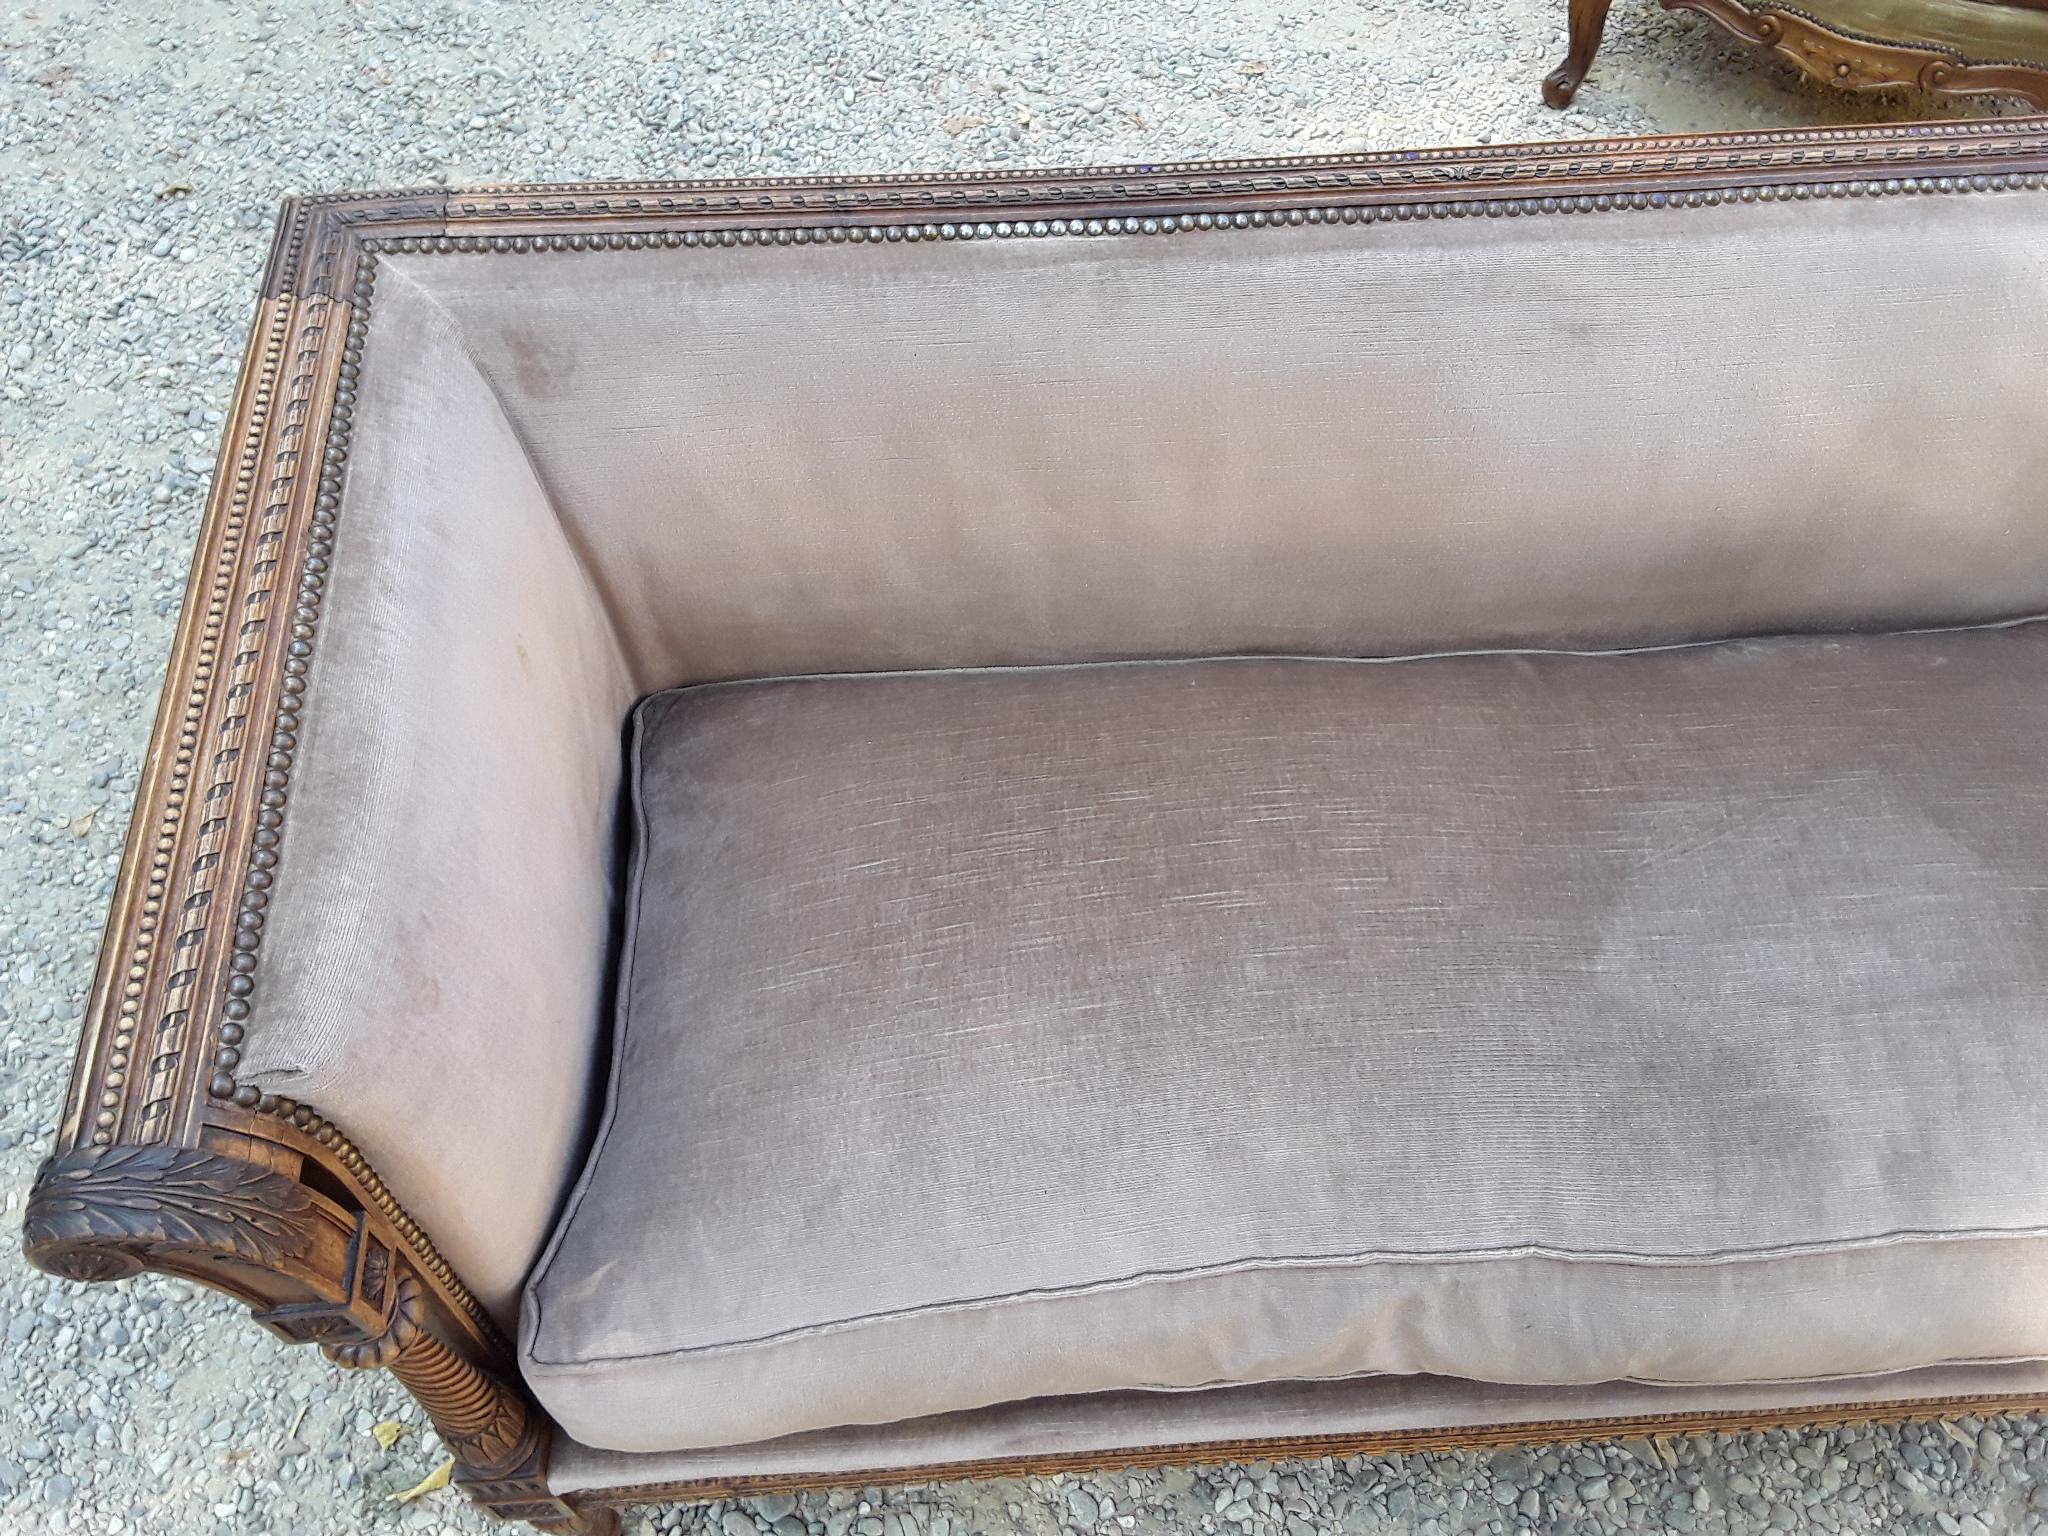 19th Century French Carved Wood Sofa with Original Fabric im Zustand „Gut“ im Angebot in Florence, IT